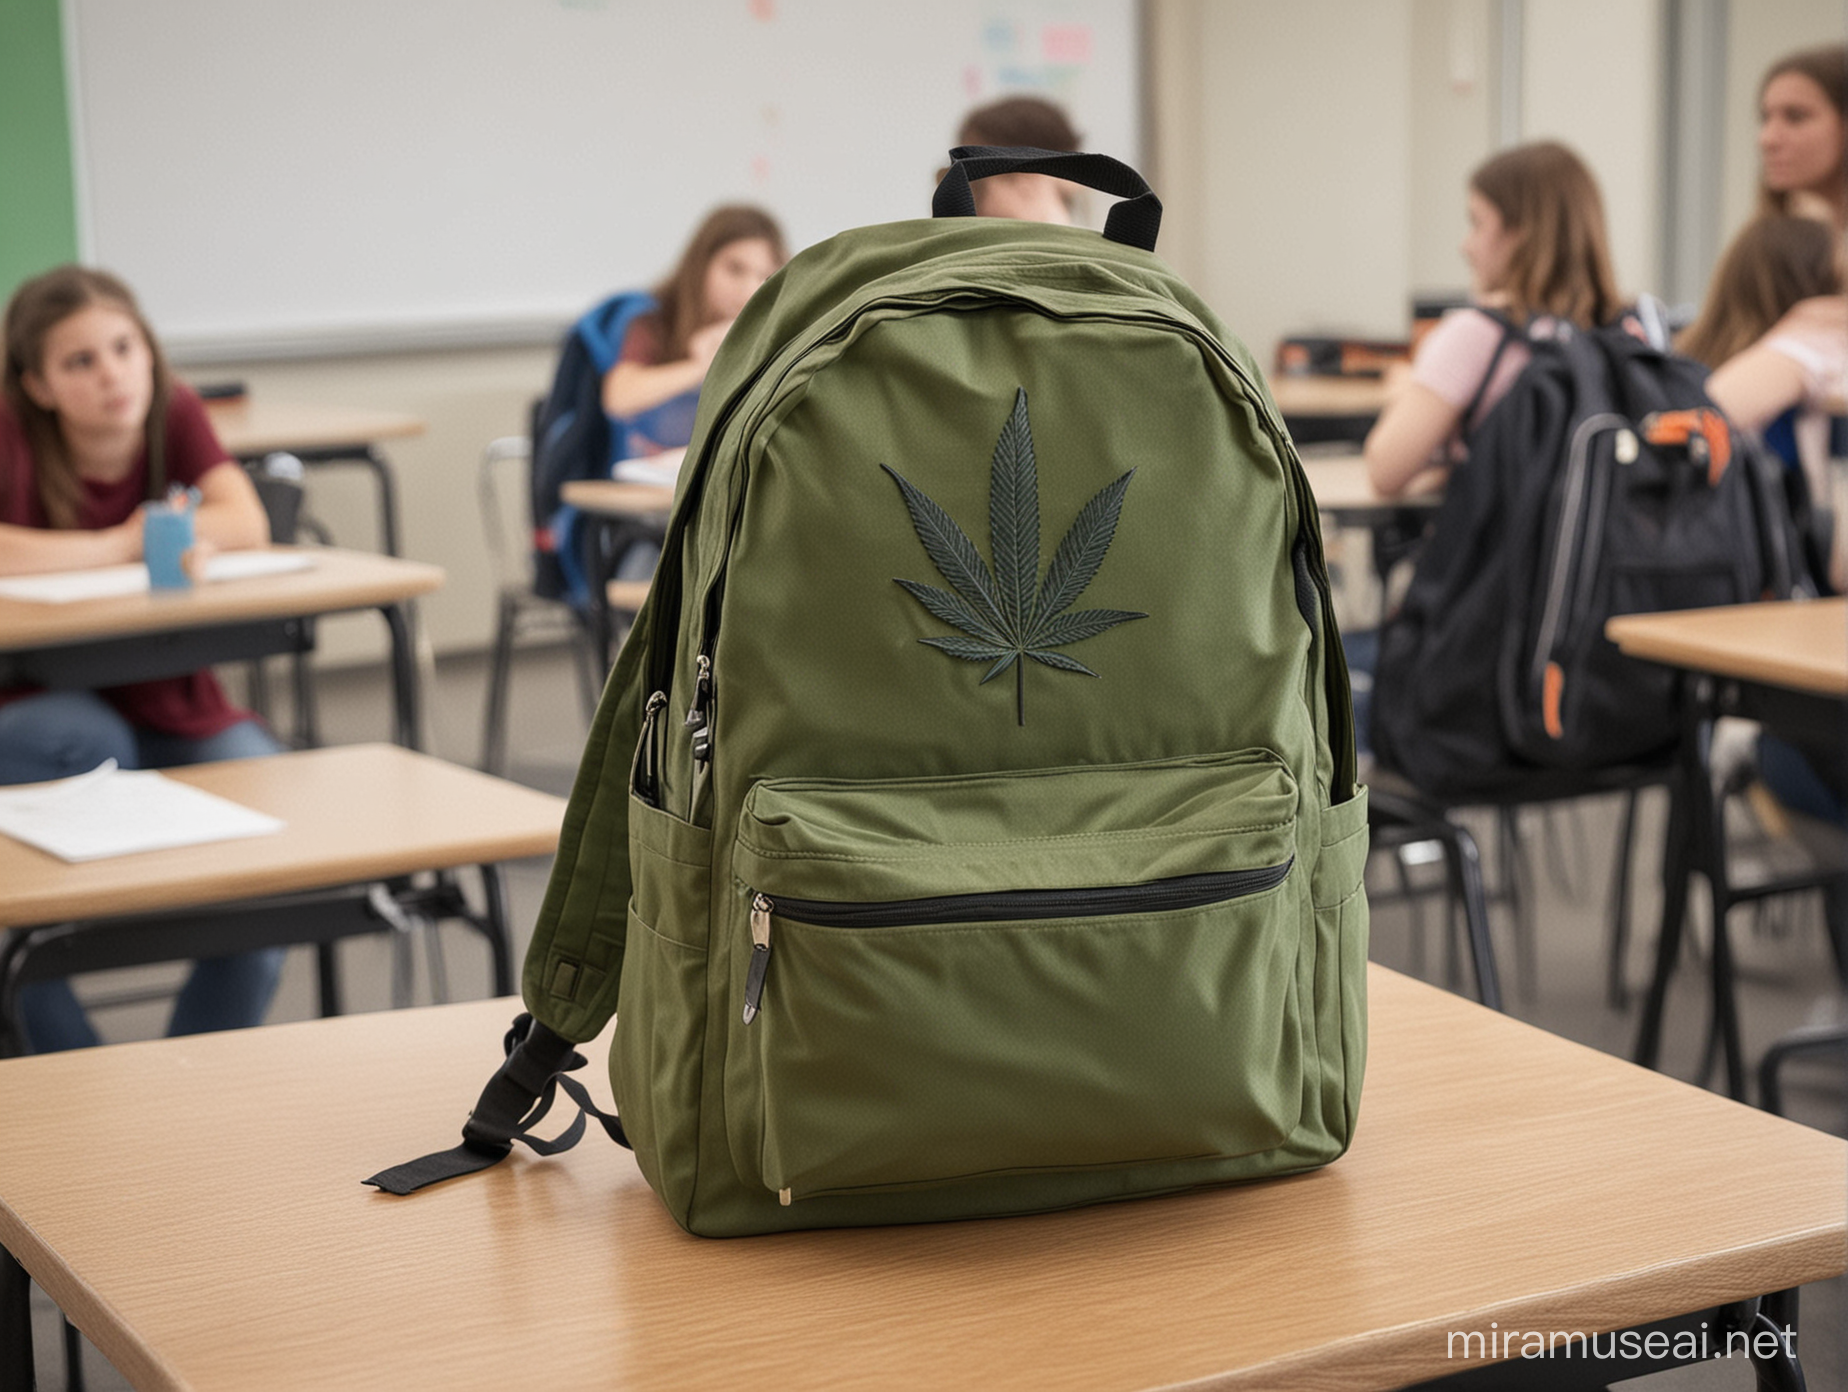 Students Discover Backpack with Marijuana in Classroom